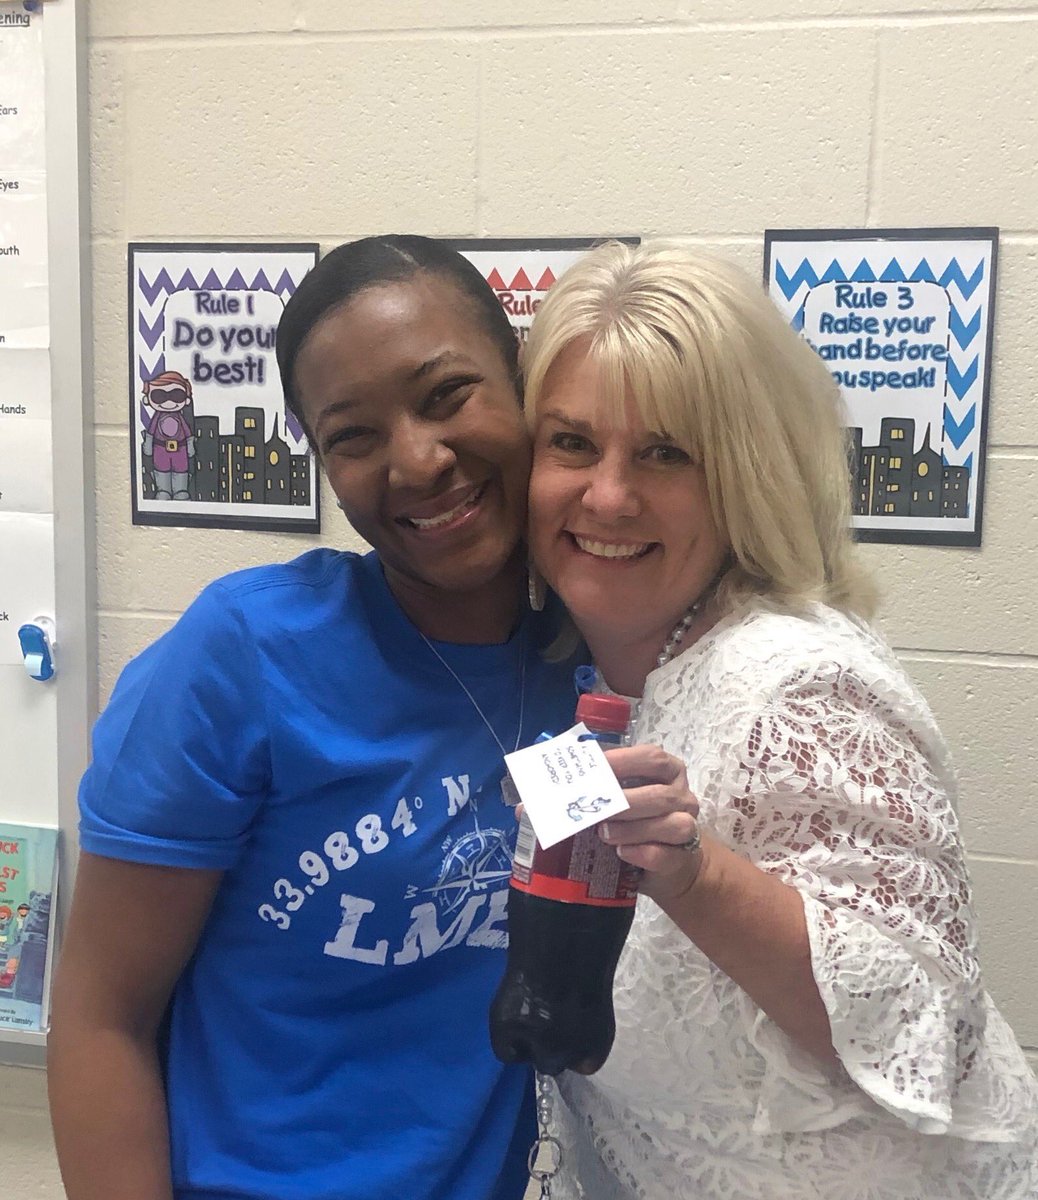 Delivering a Coke and a Smile to our new Mariner Faculty today! #loveyourpeople #lmeslife #navigatingweek1 ⁦@MarinerMates⁩ ⁦@jstanleyfl⁩